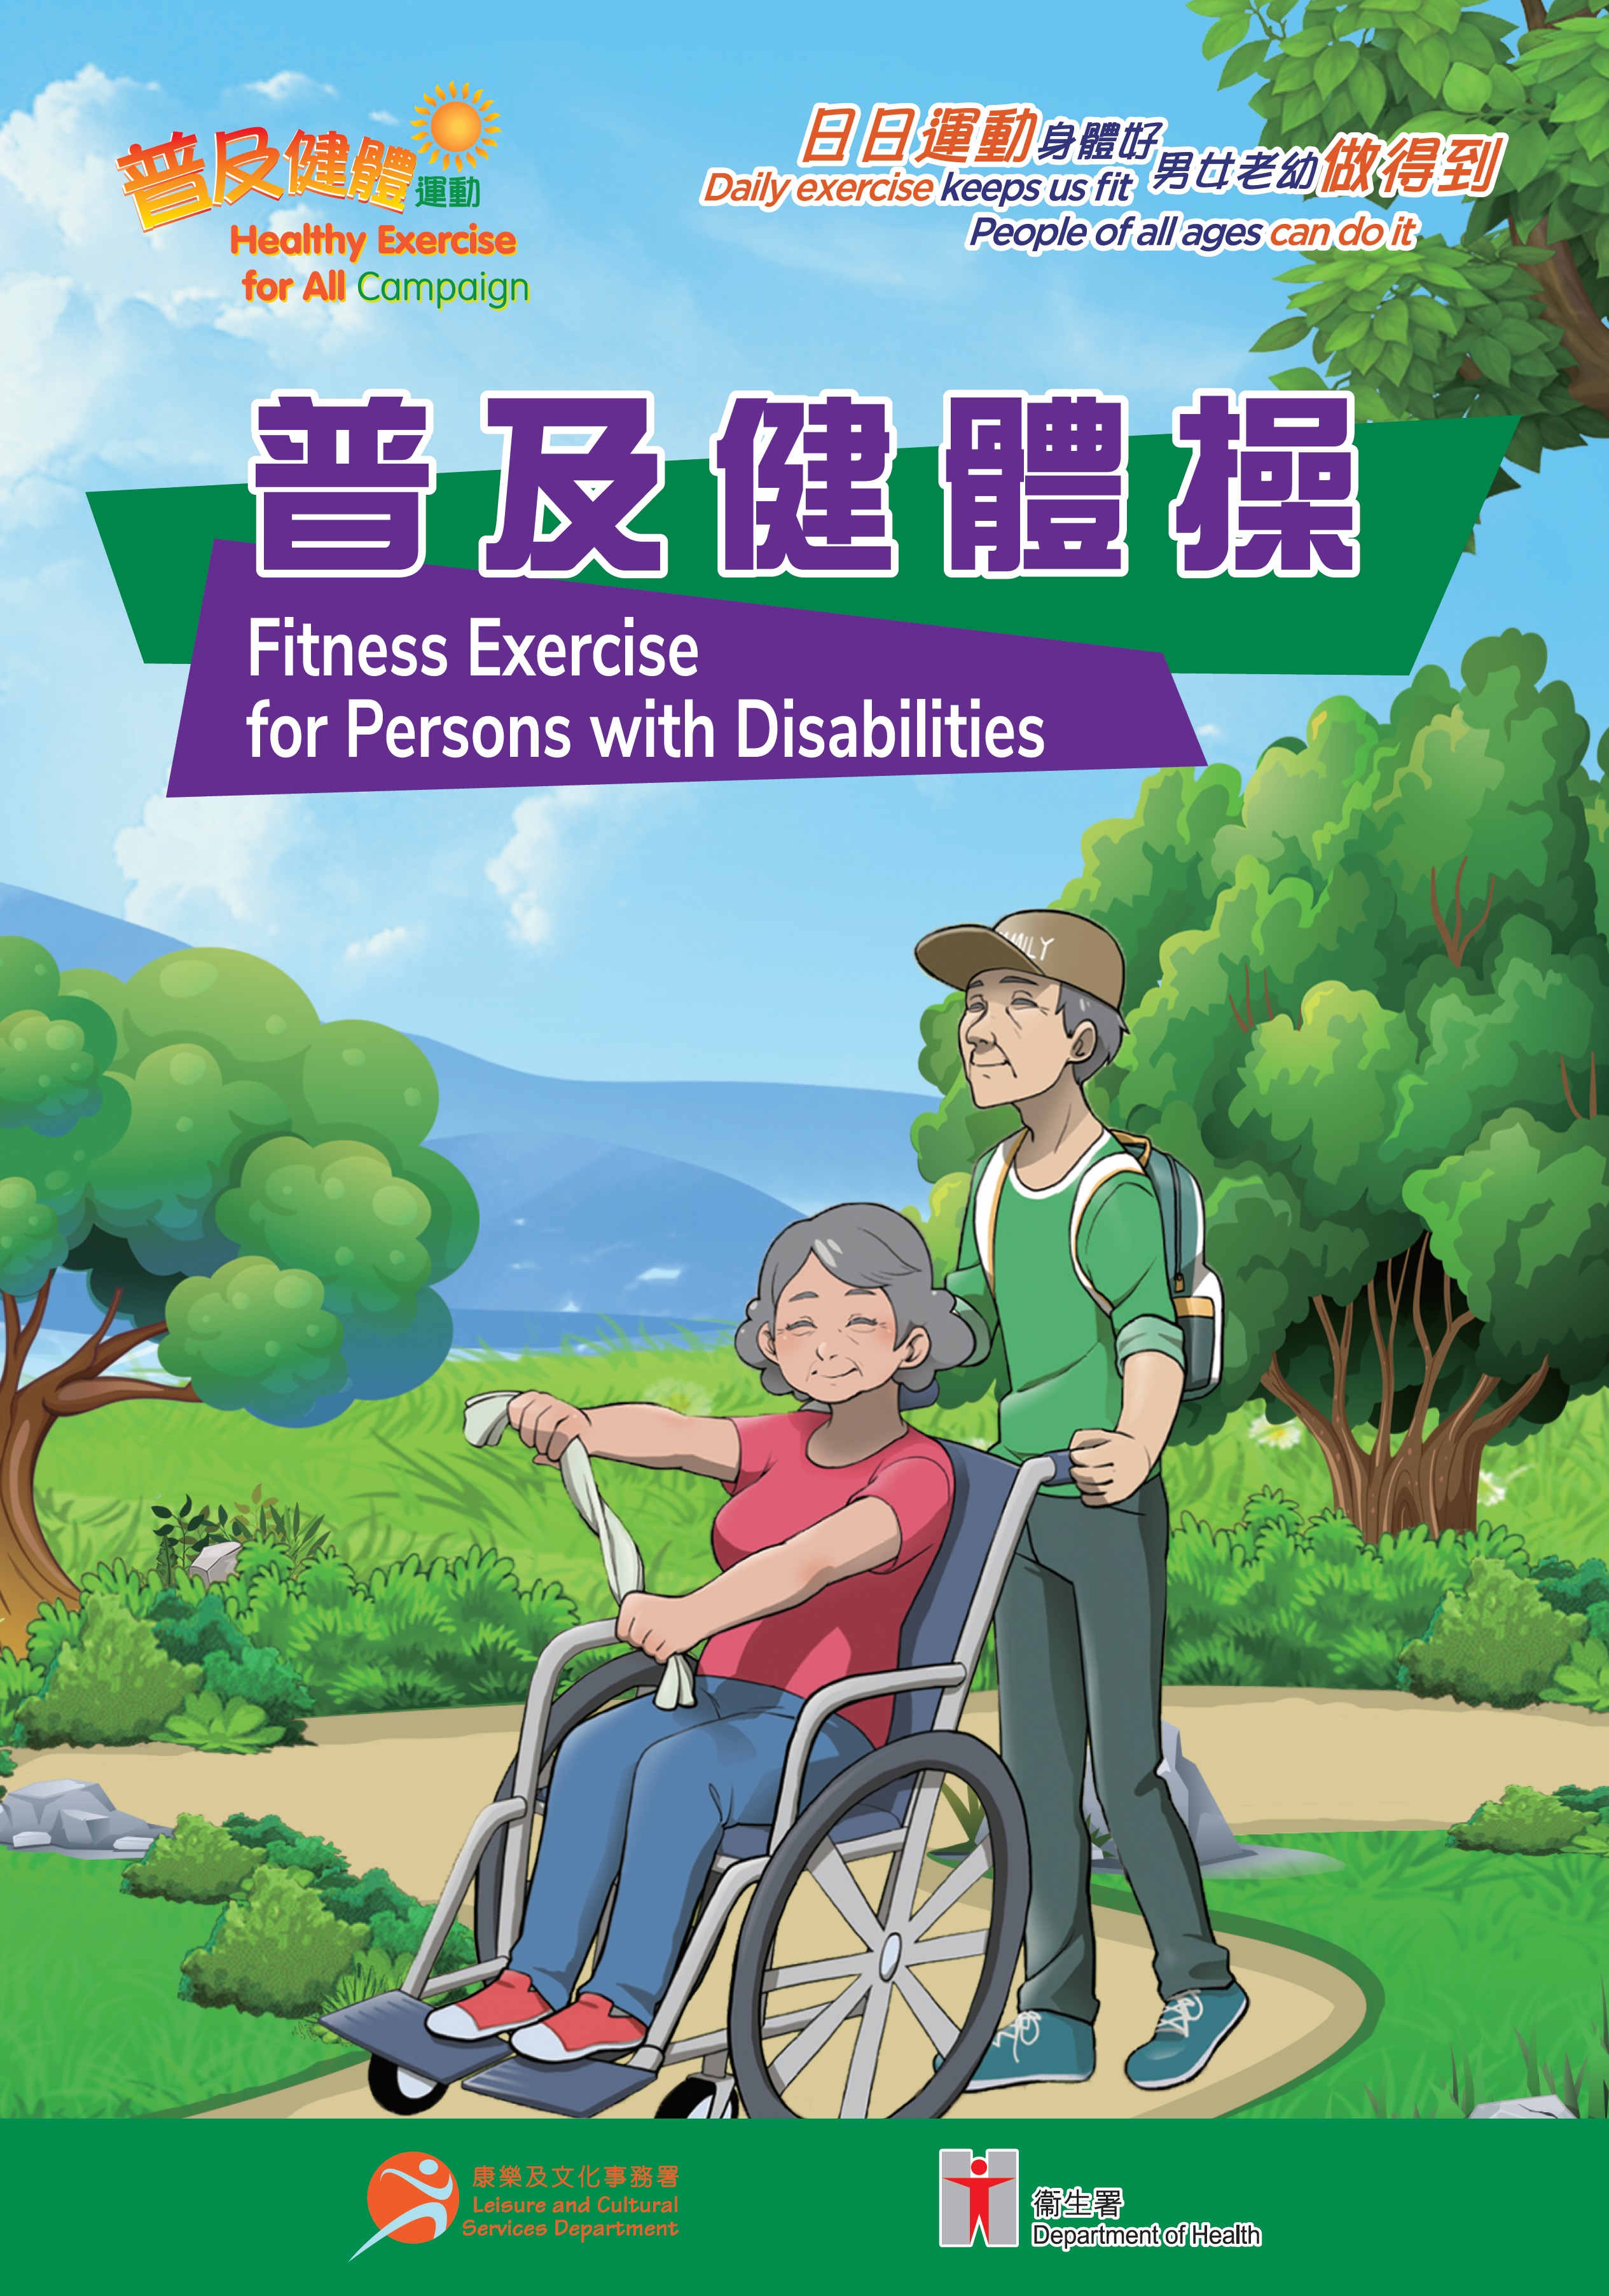 Picture: Fitness Exercise for Persons with Disabilities